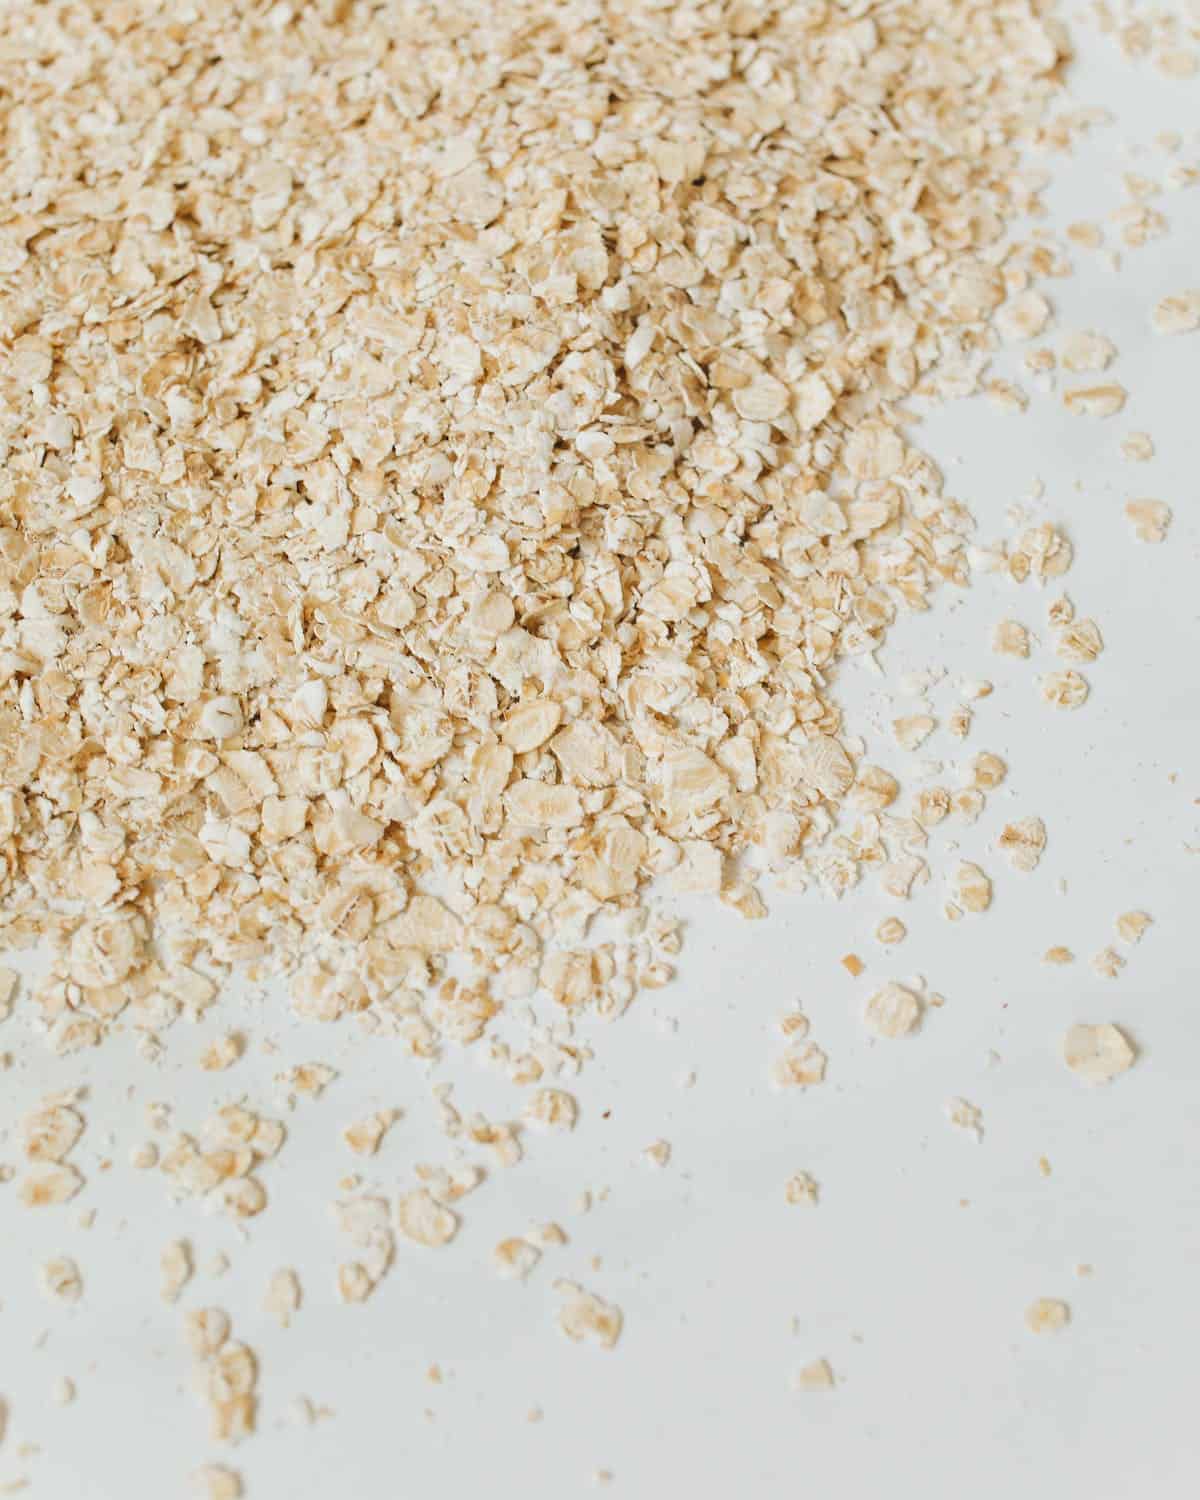 A pile of oats on a white surface.